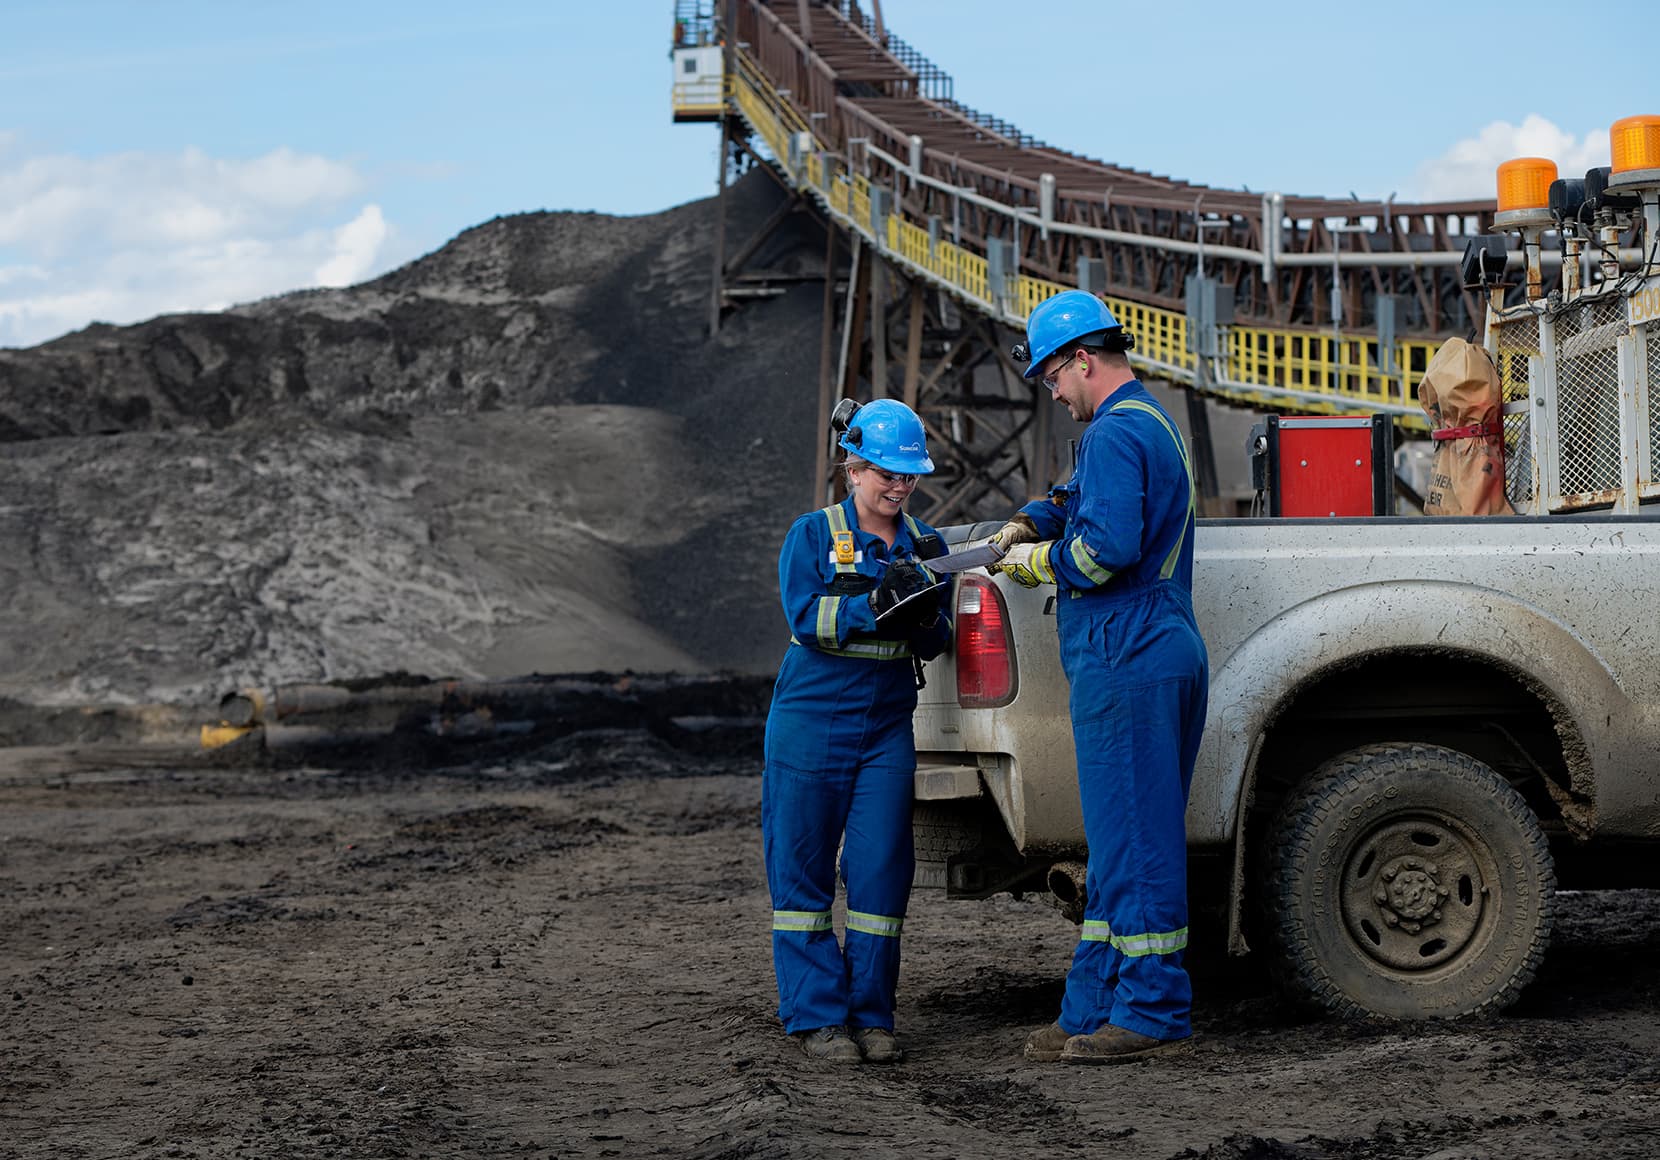 Two workers, Michelle Liebau and Mike Ellis, talking beside a truck by the main feed conveyor from the crusher at Extraction Plant 86. They are wearing blue hard hats, safety glasses, ear plugs, coveralls and gloves.